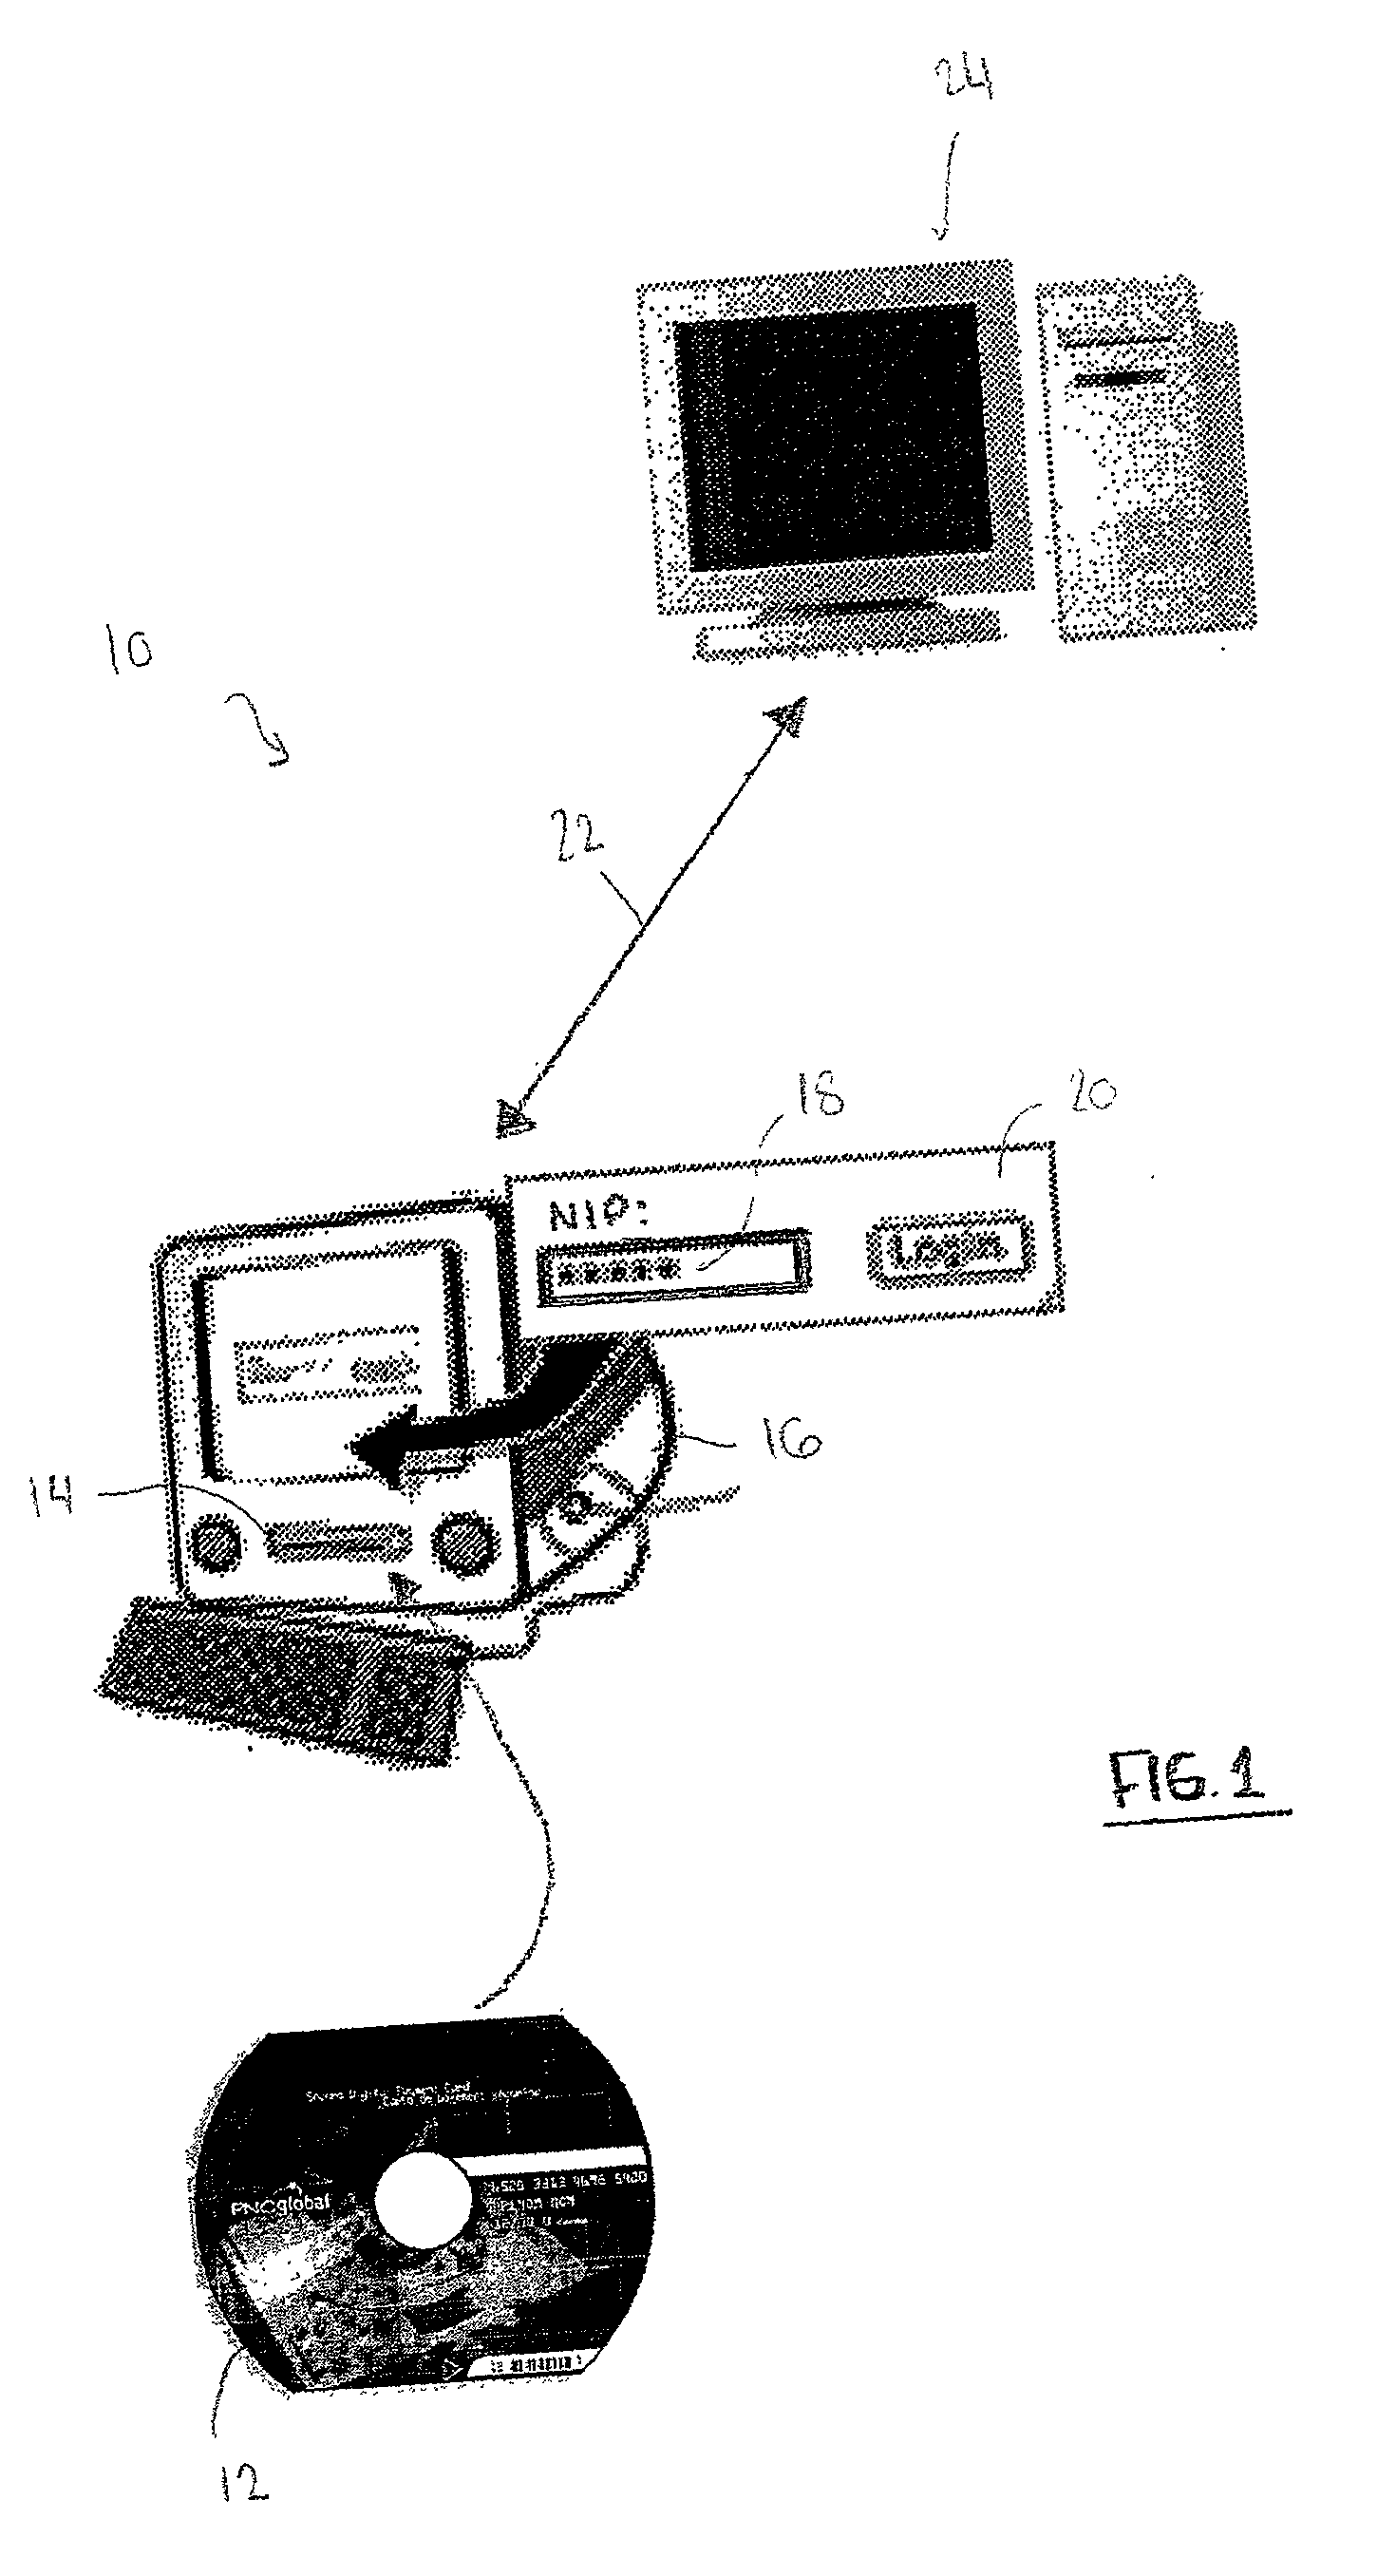 System and method for providing services to a remote user through a network